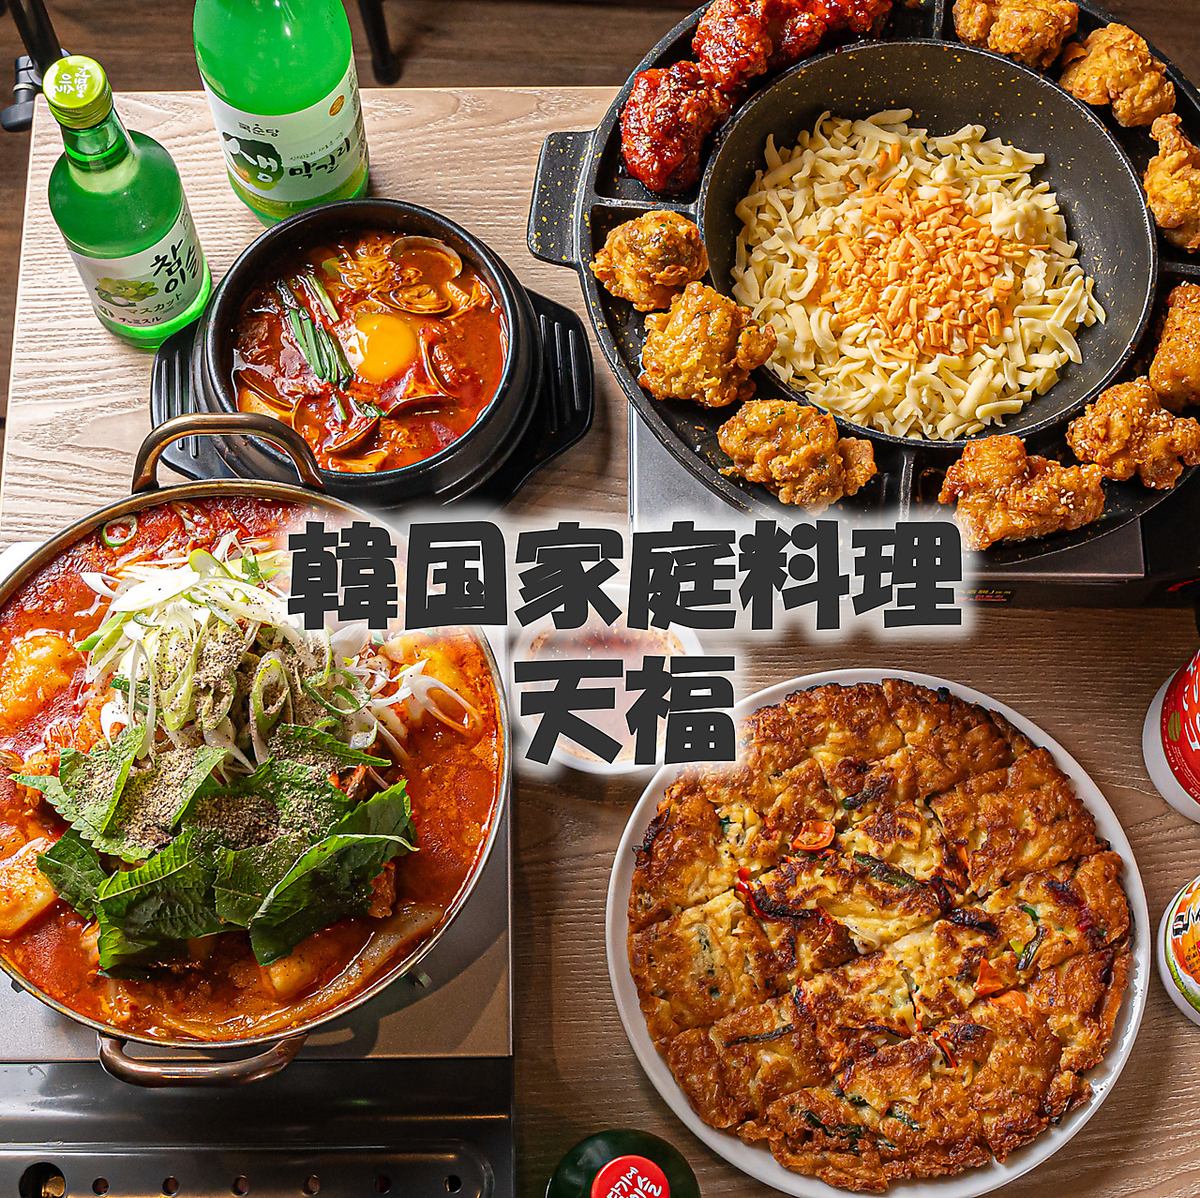 Please spend a blissful time with delicious Korean food and alcohol.